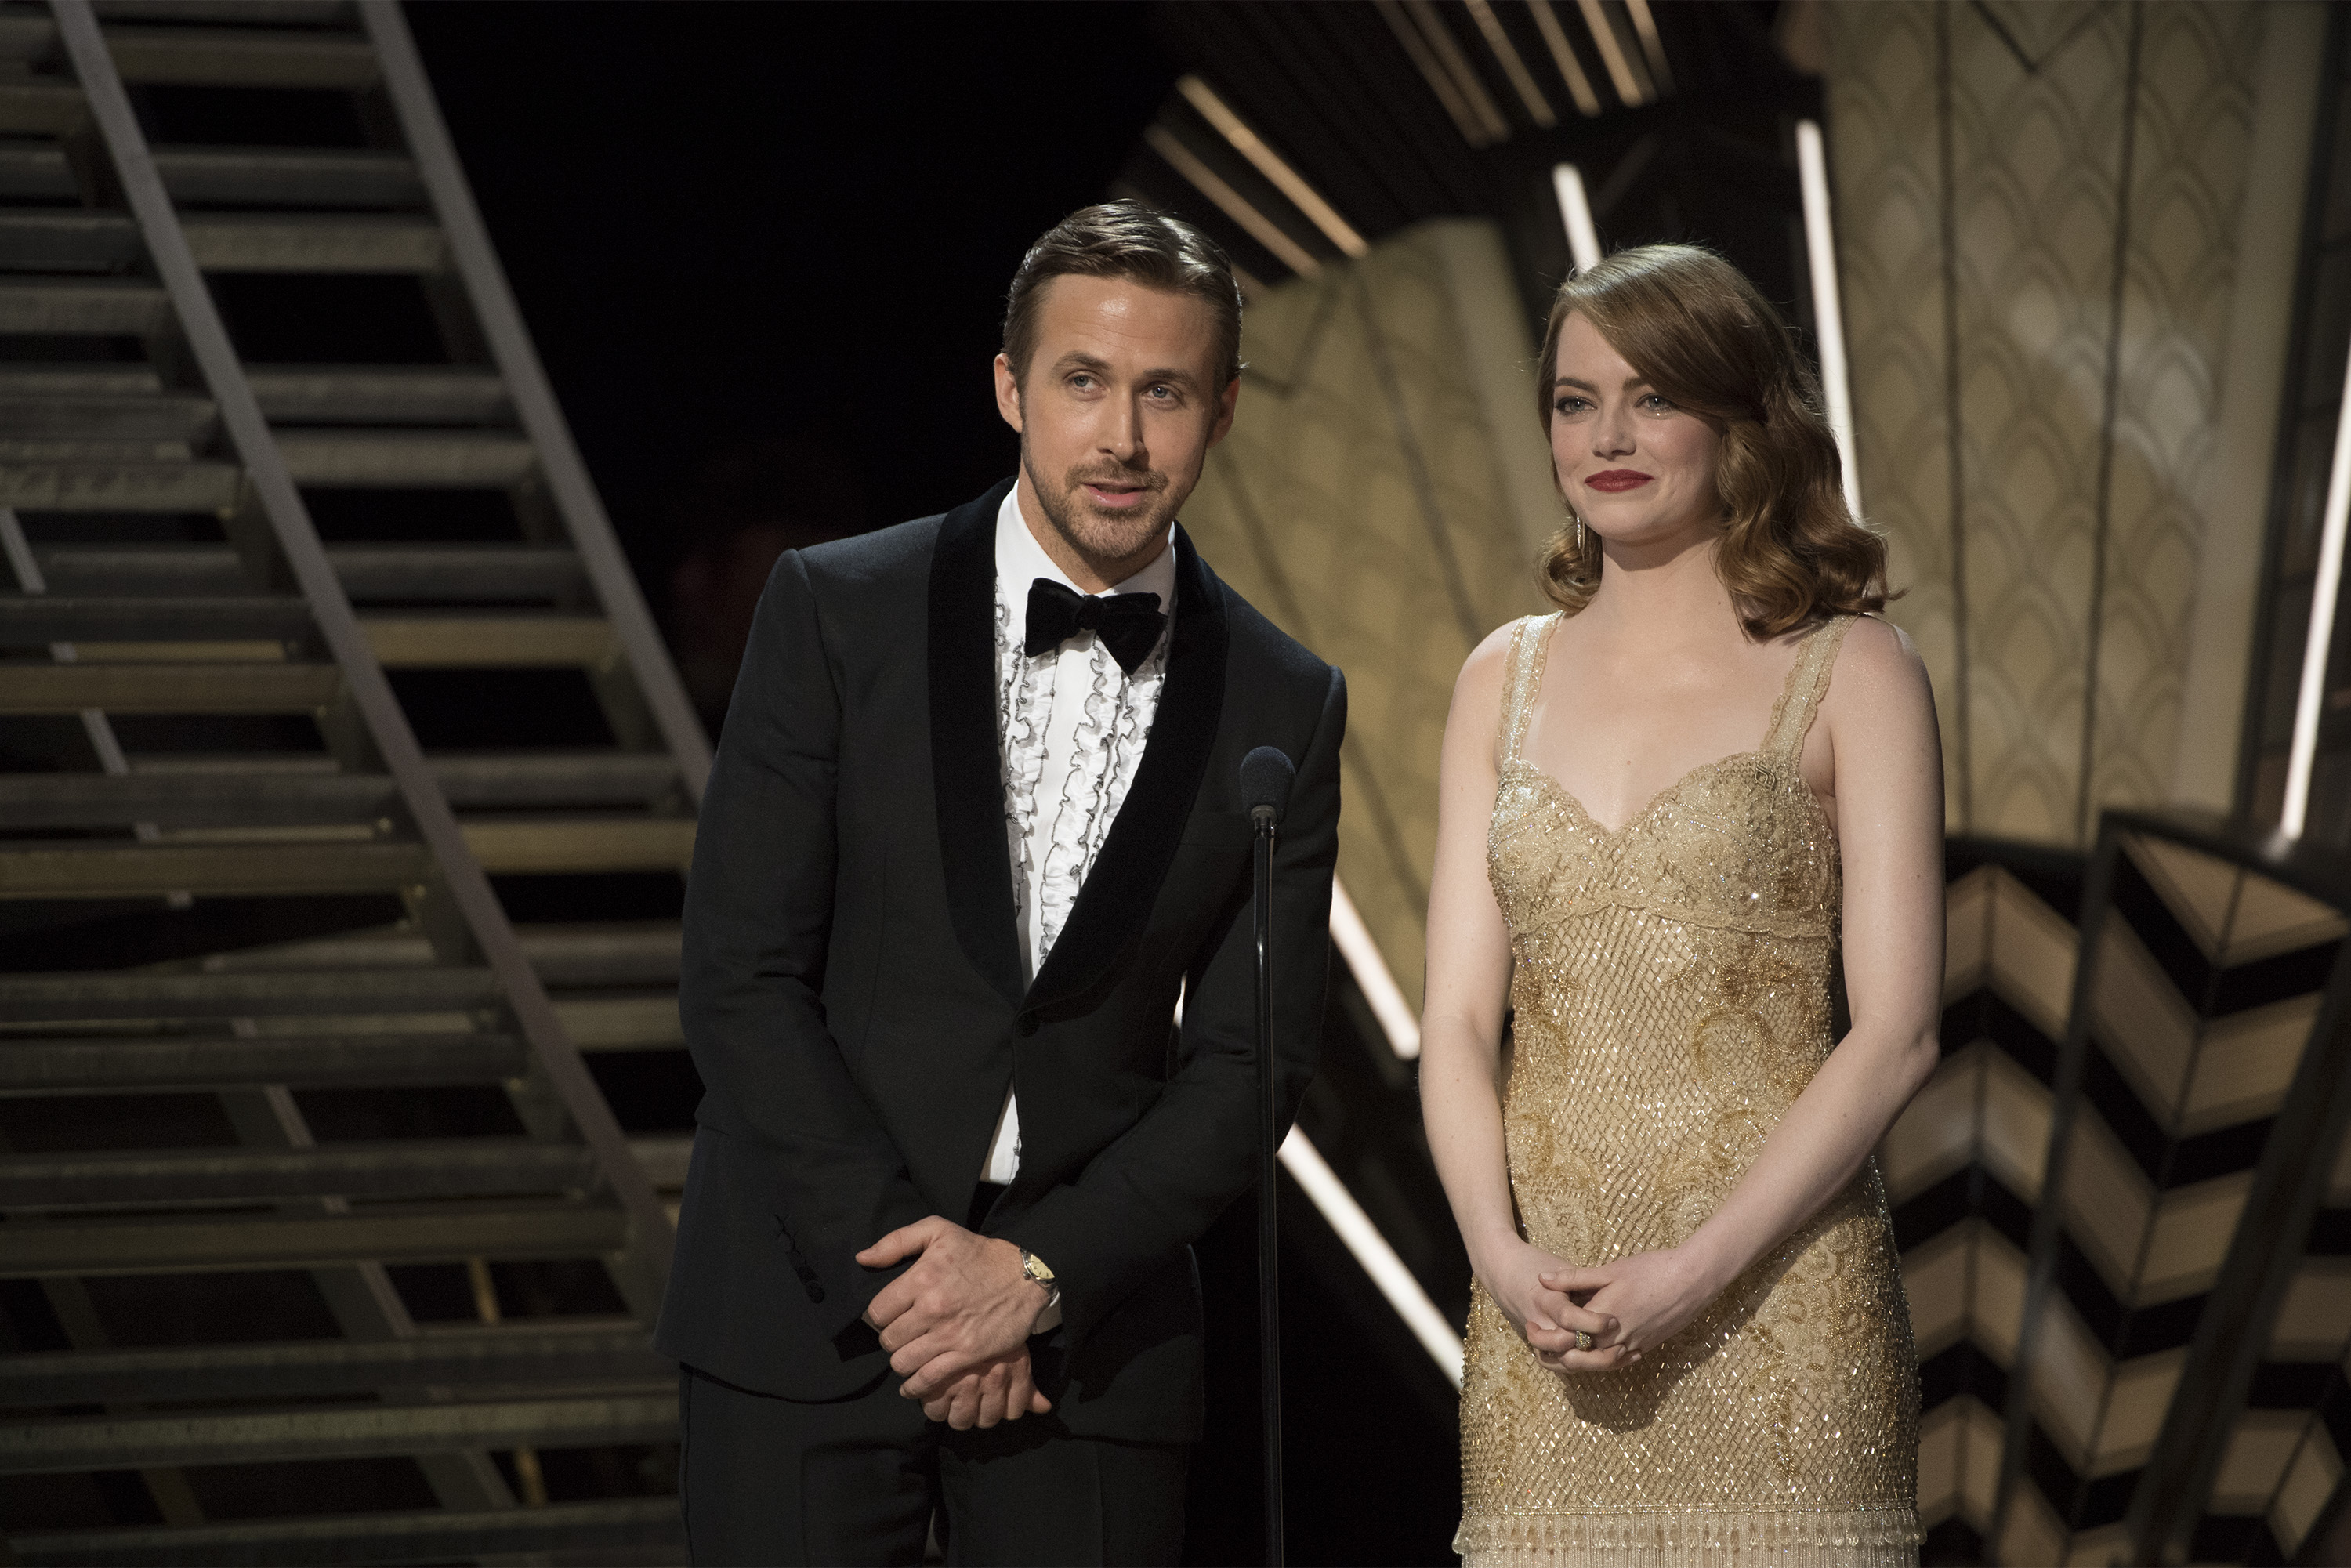 Emma Stone on Starring In La La Land and Working With Ryan Gosling